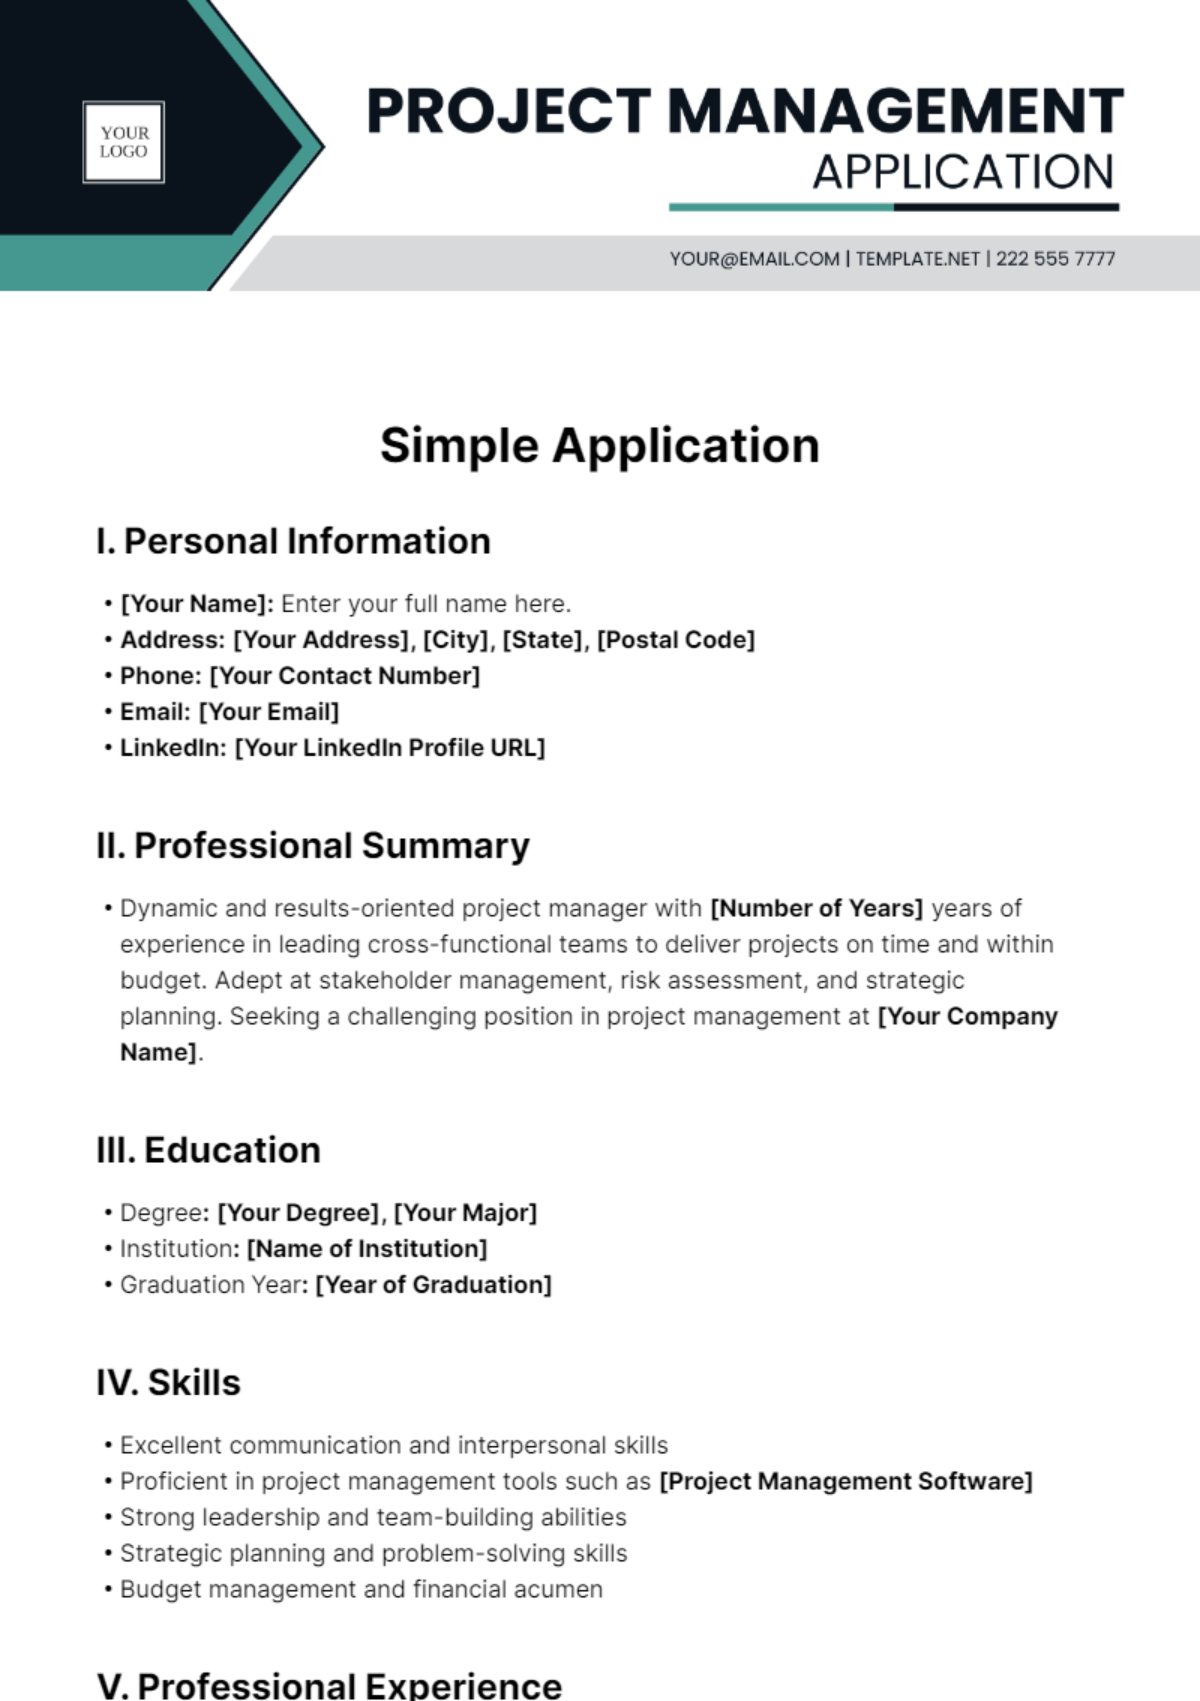 Simple Application Template